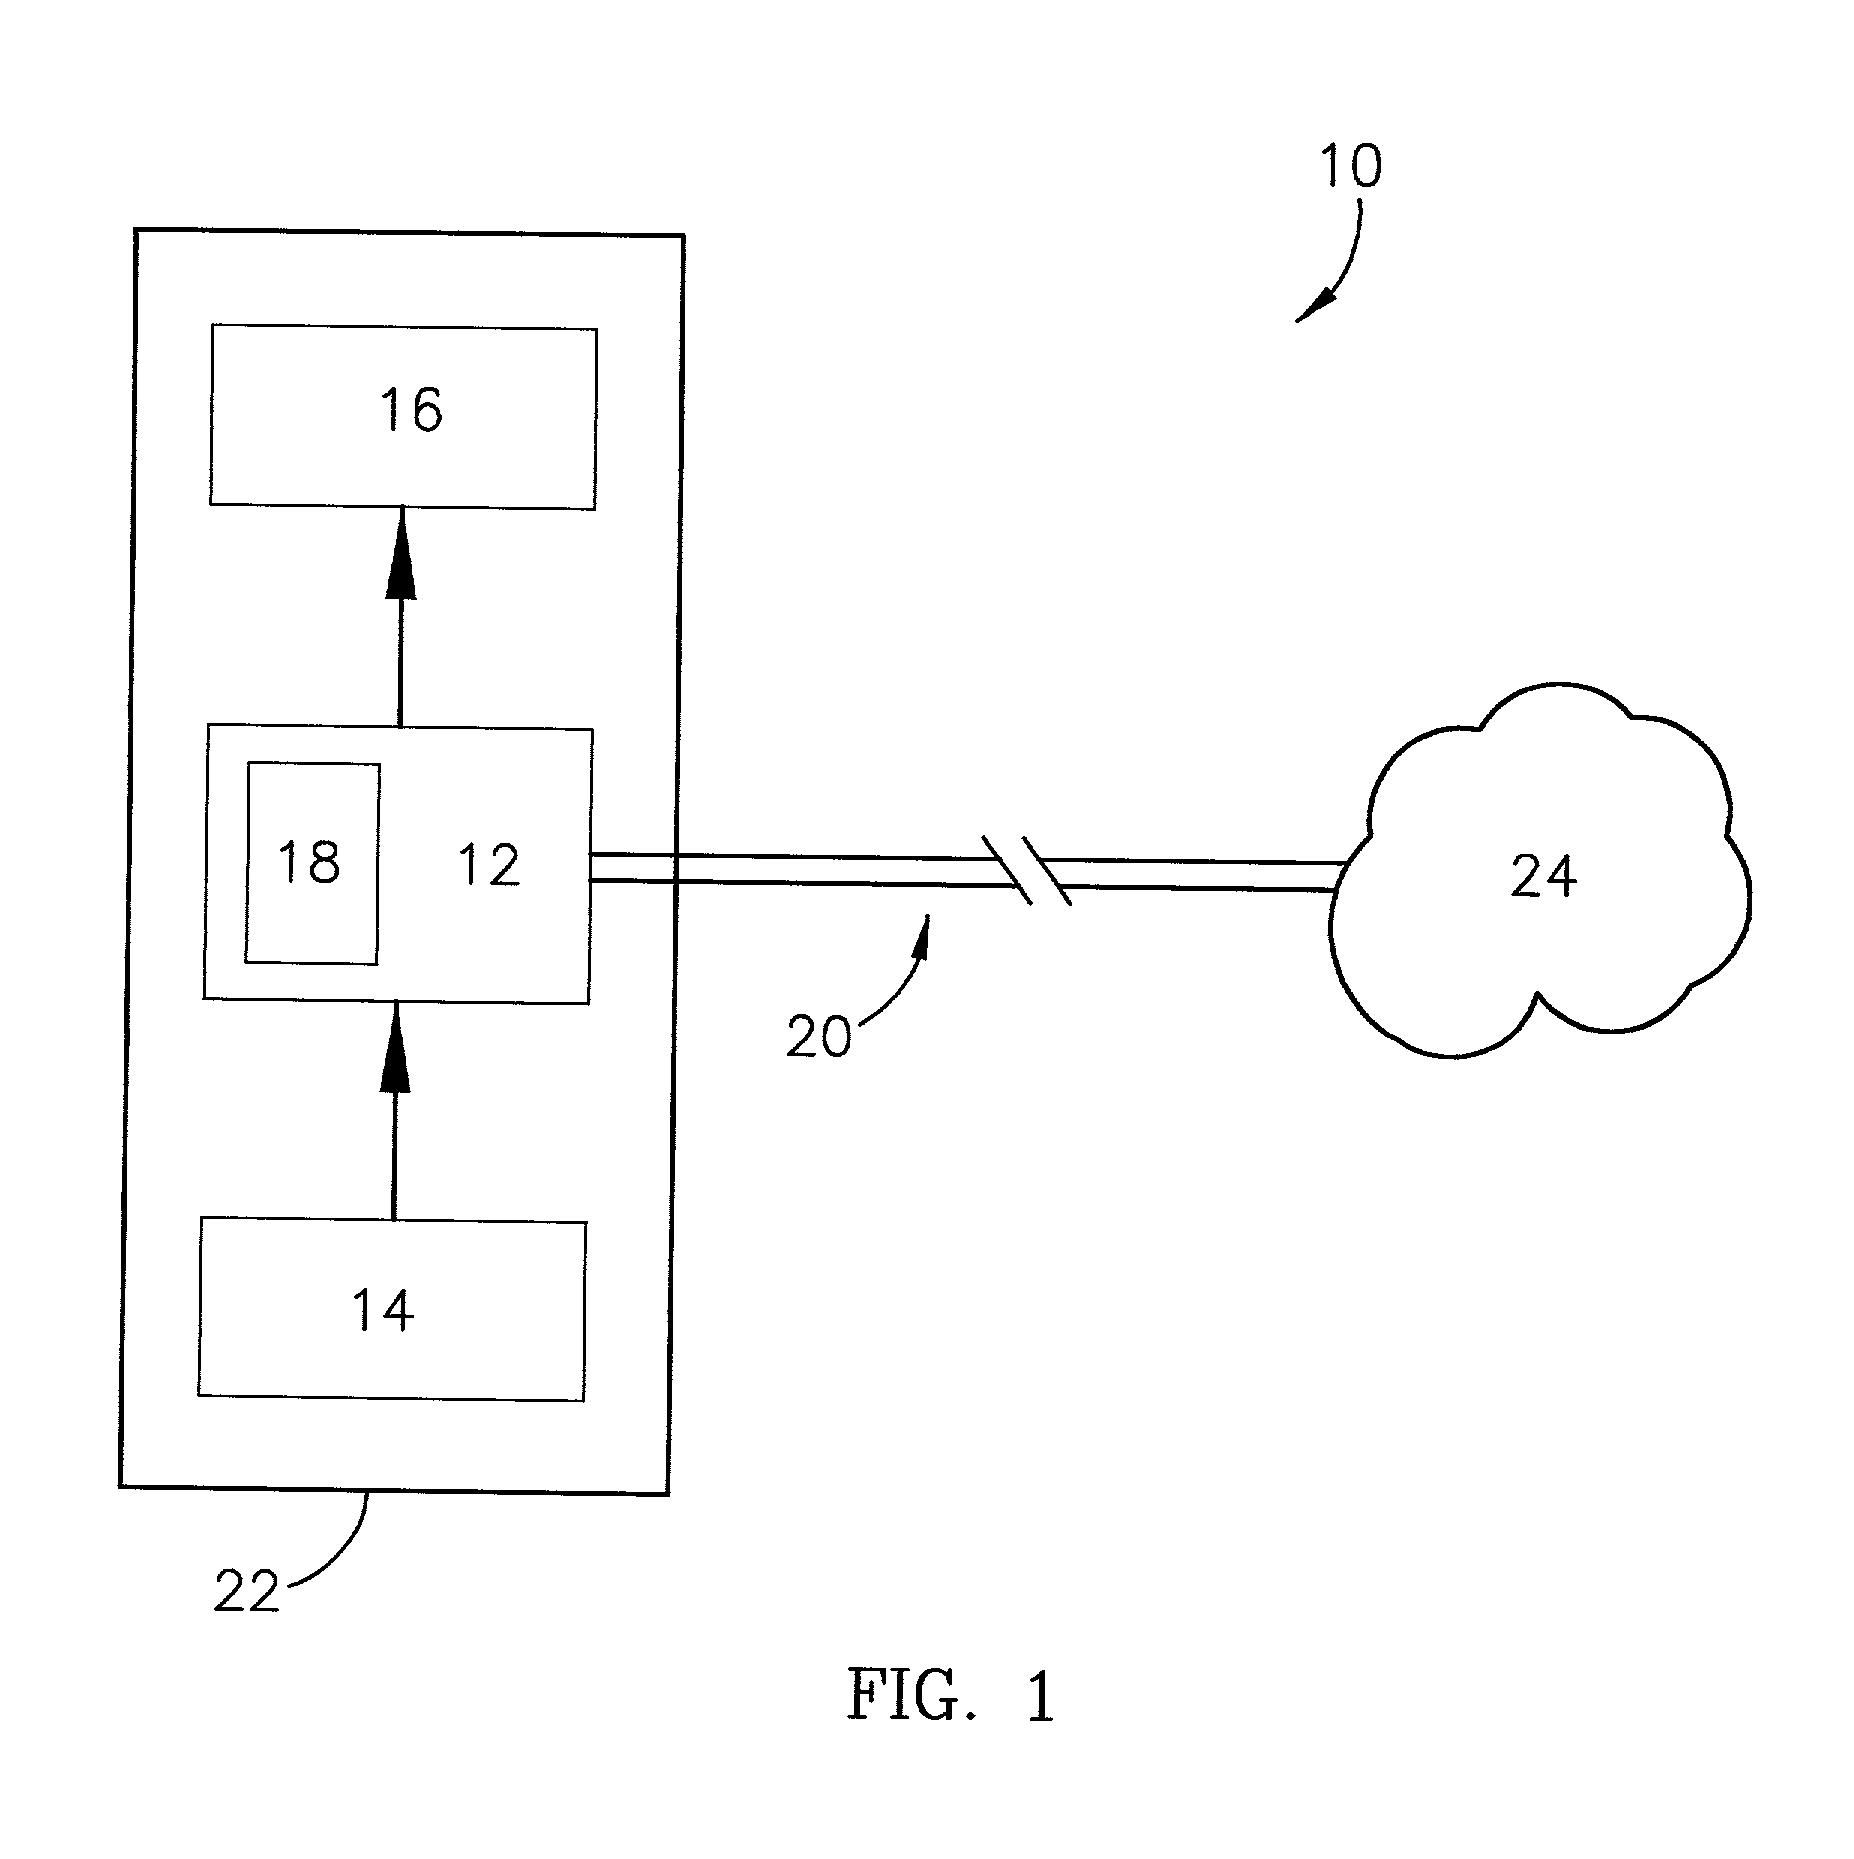 Computer program, method, and system for monitoring nutrition content of consumables and for facilitating menu planning